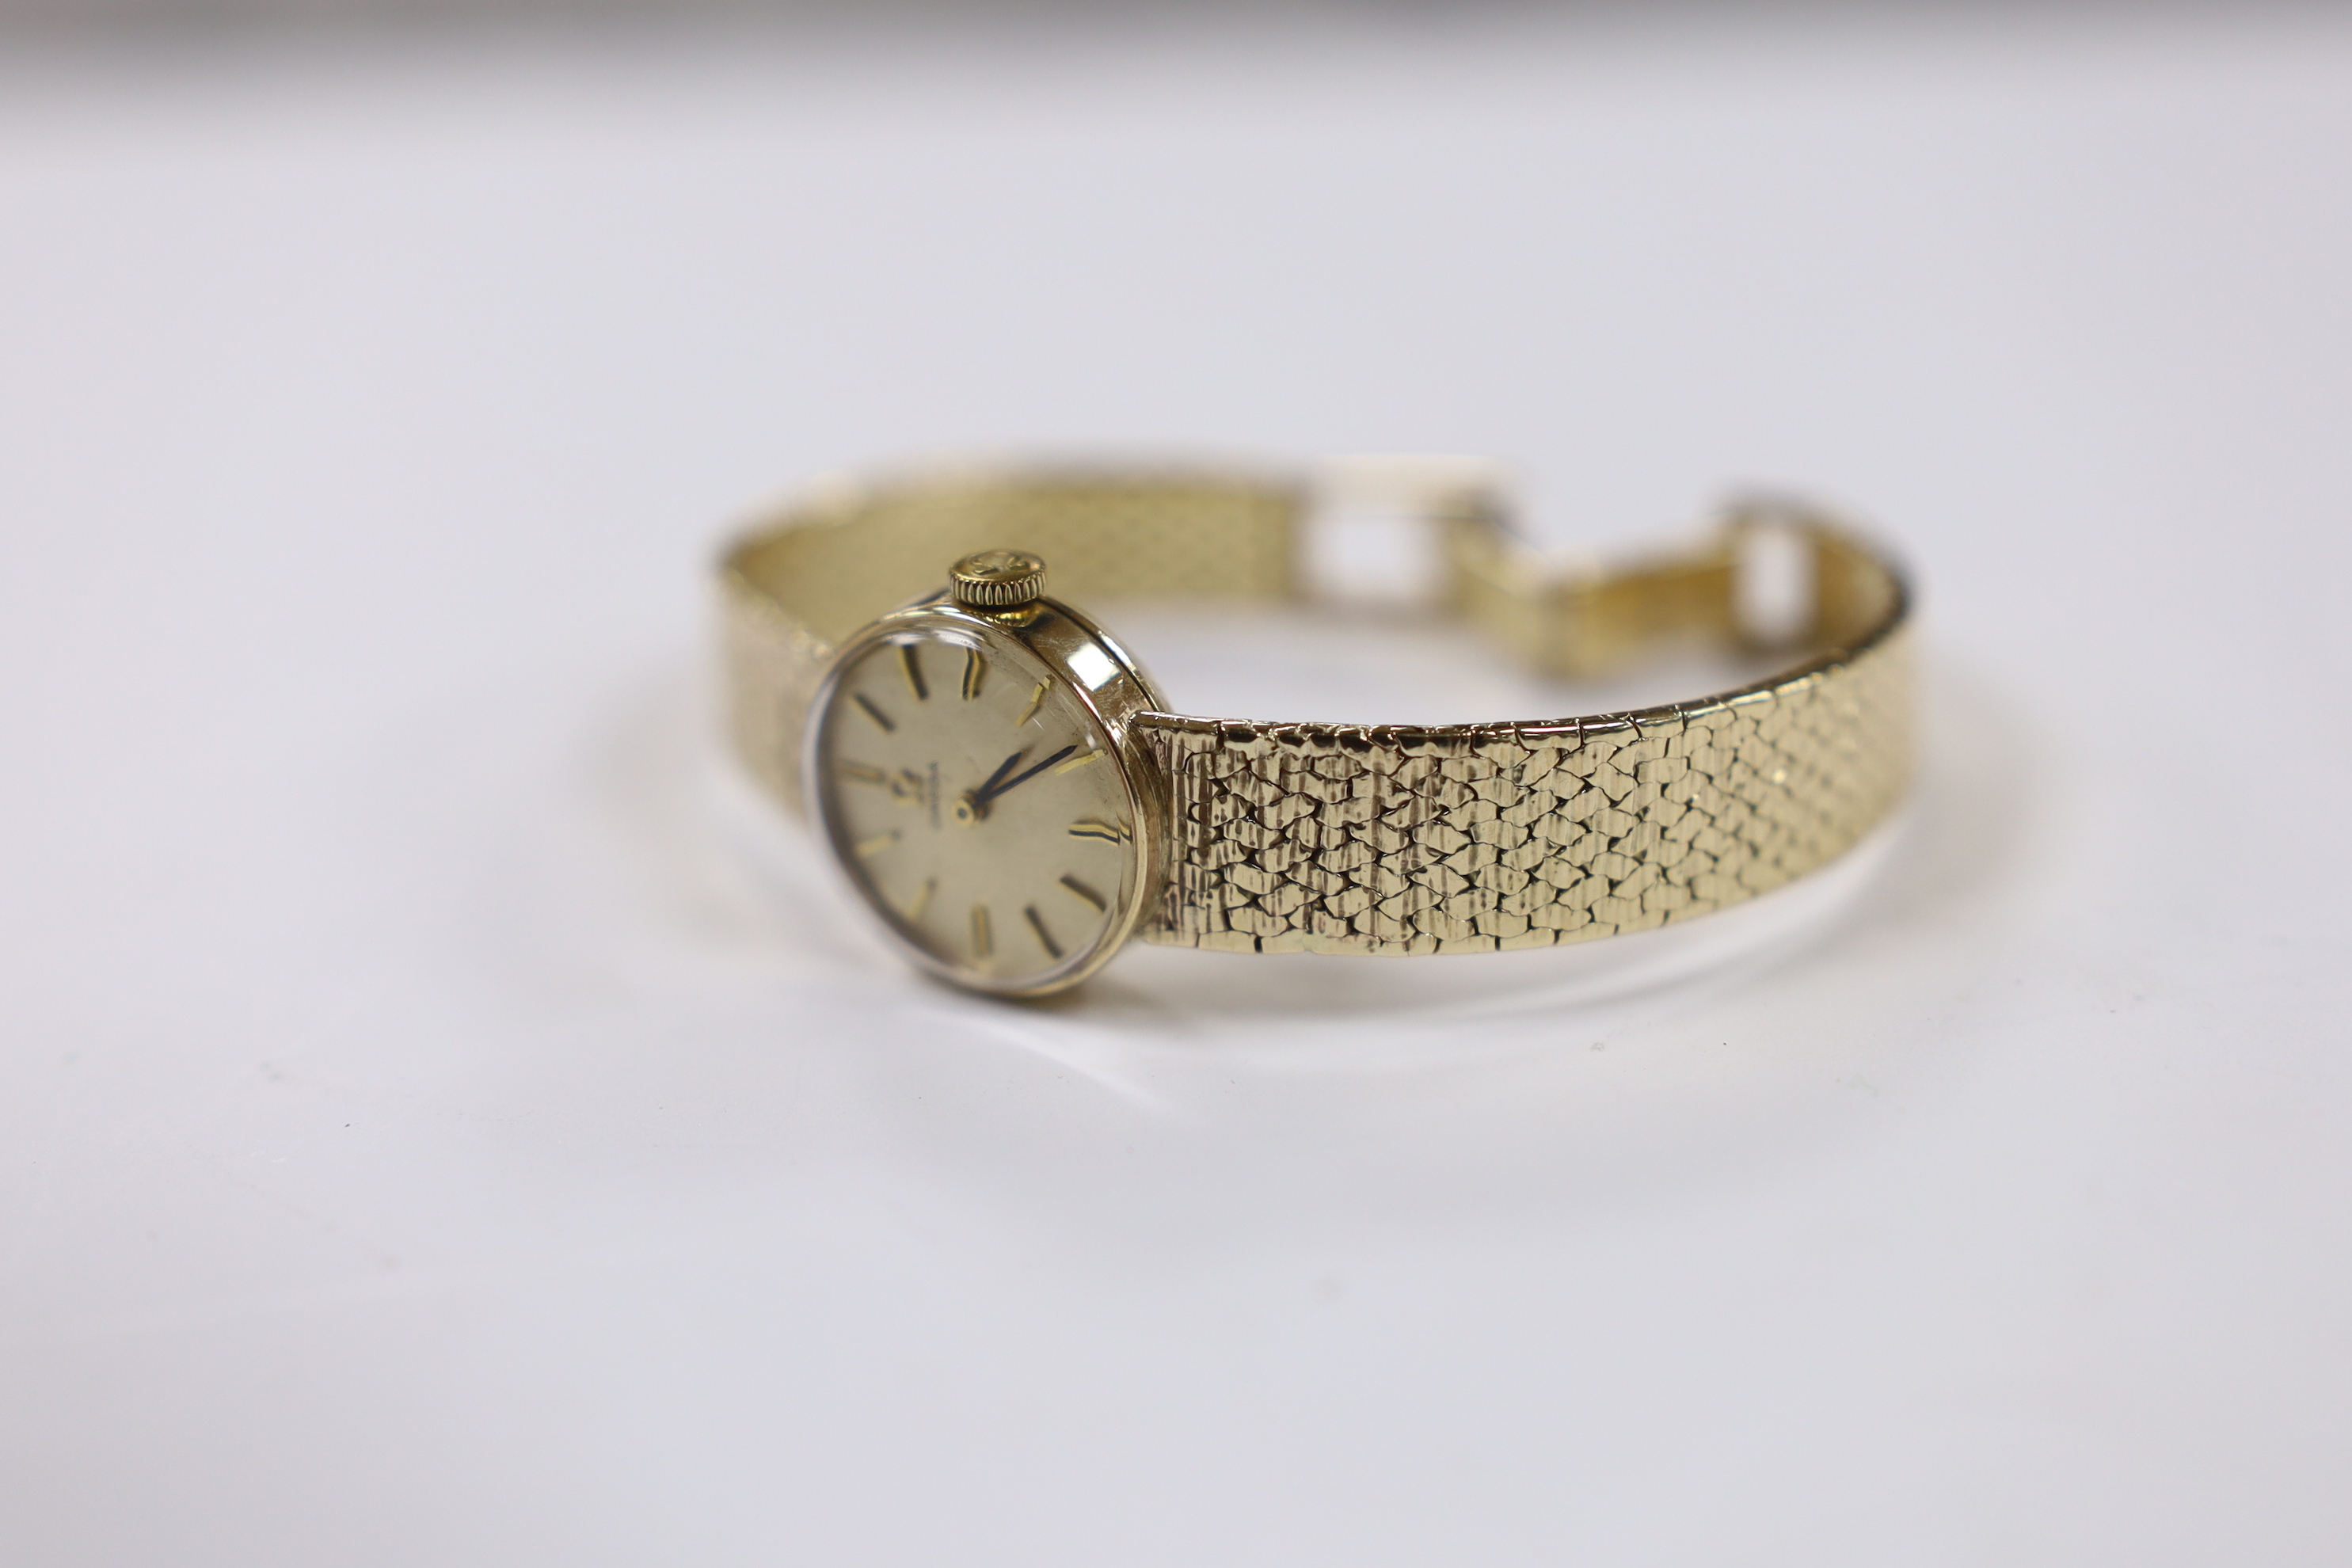 A lady's 9ct gold Omega manual wind wrist watch, on integral 9ct gold bracelet, overall length 15.5cm, gross weight 21.9 grams.